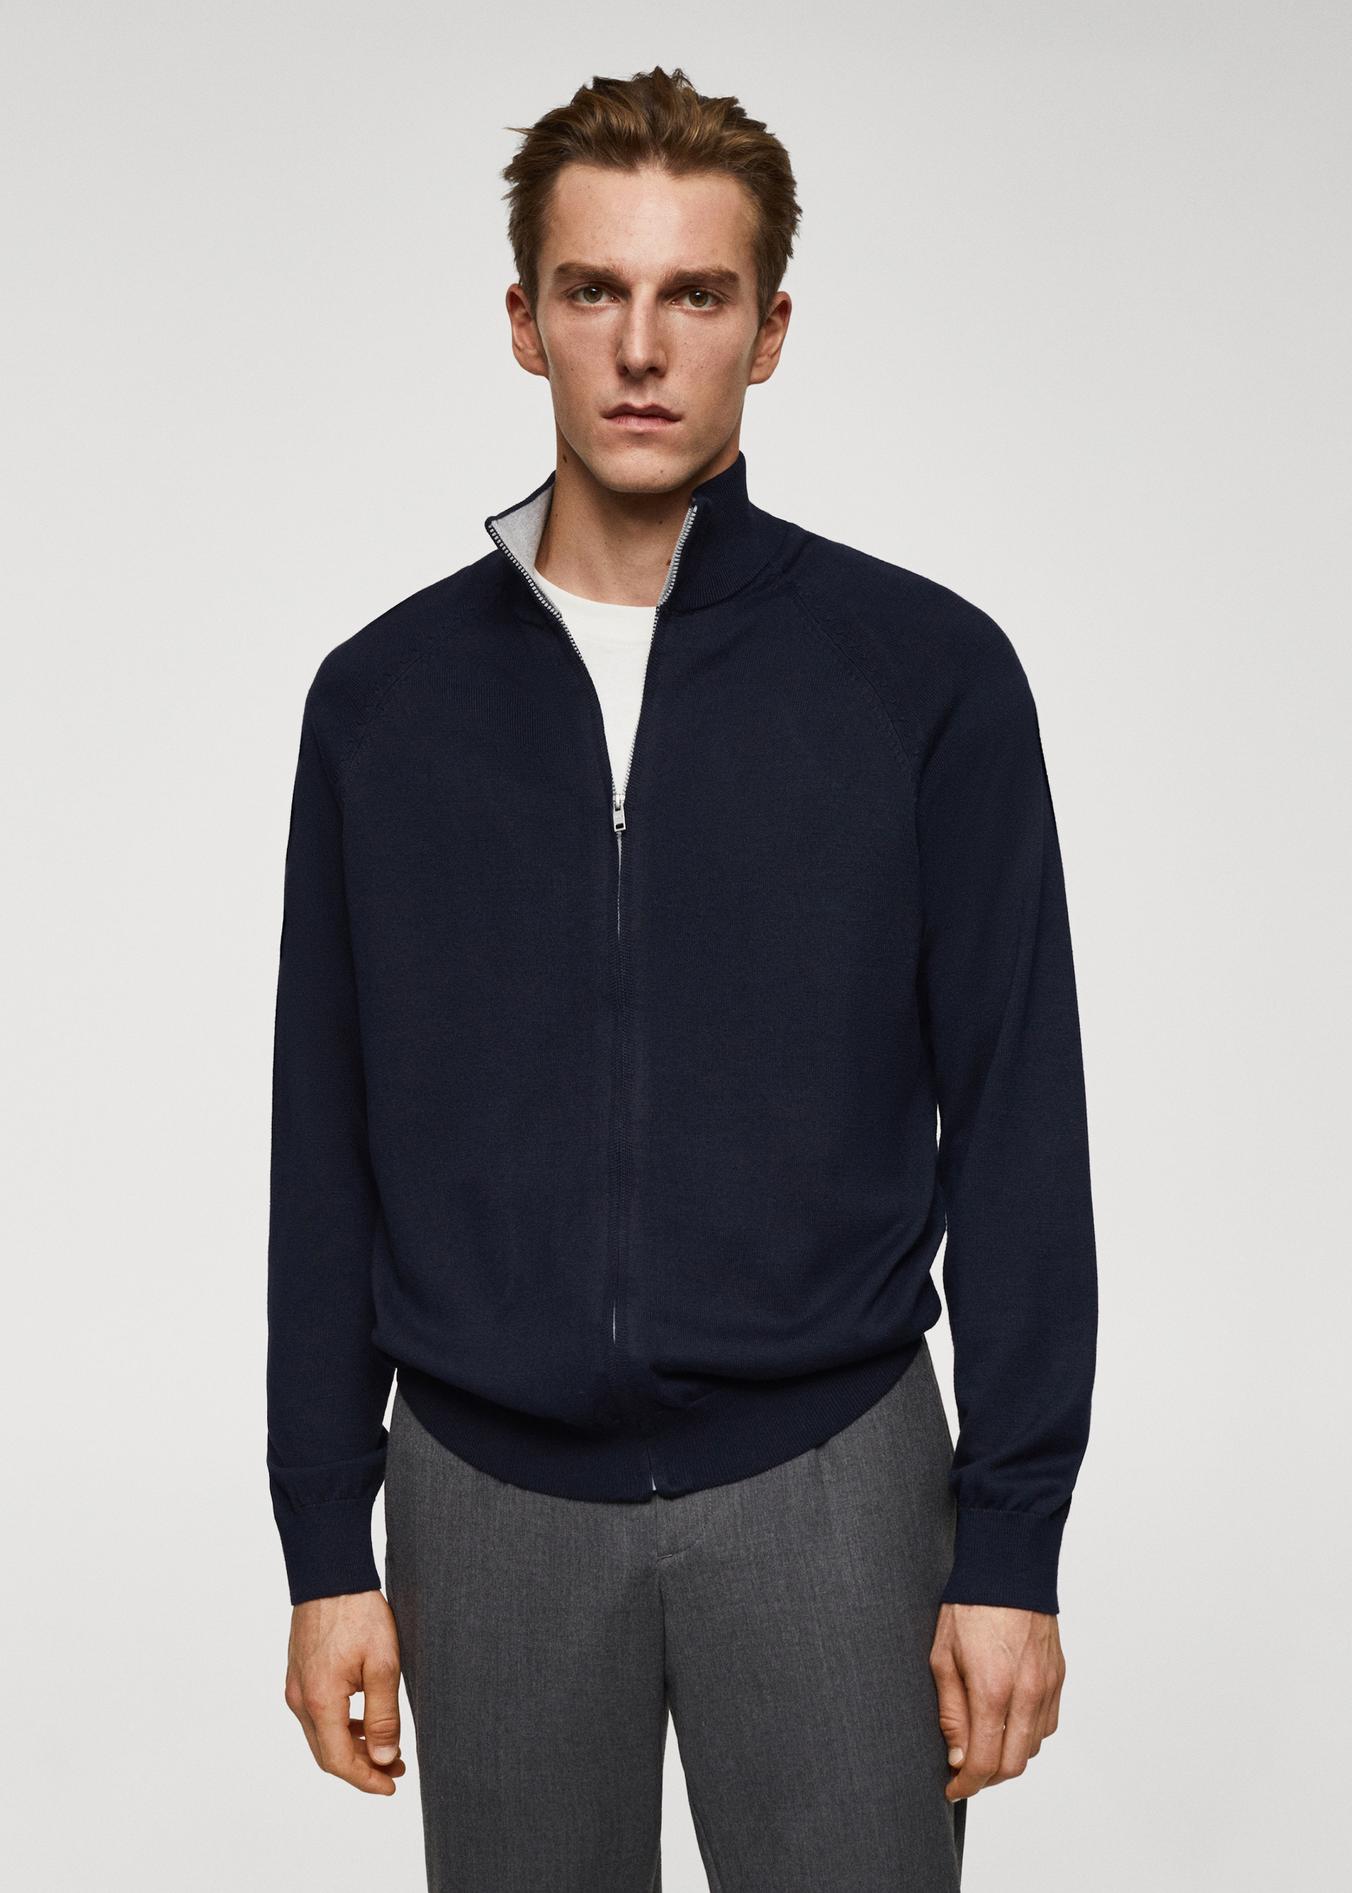 Zipped cotton cardigan offers at S$ 69.9 in Mango